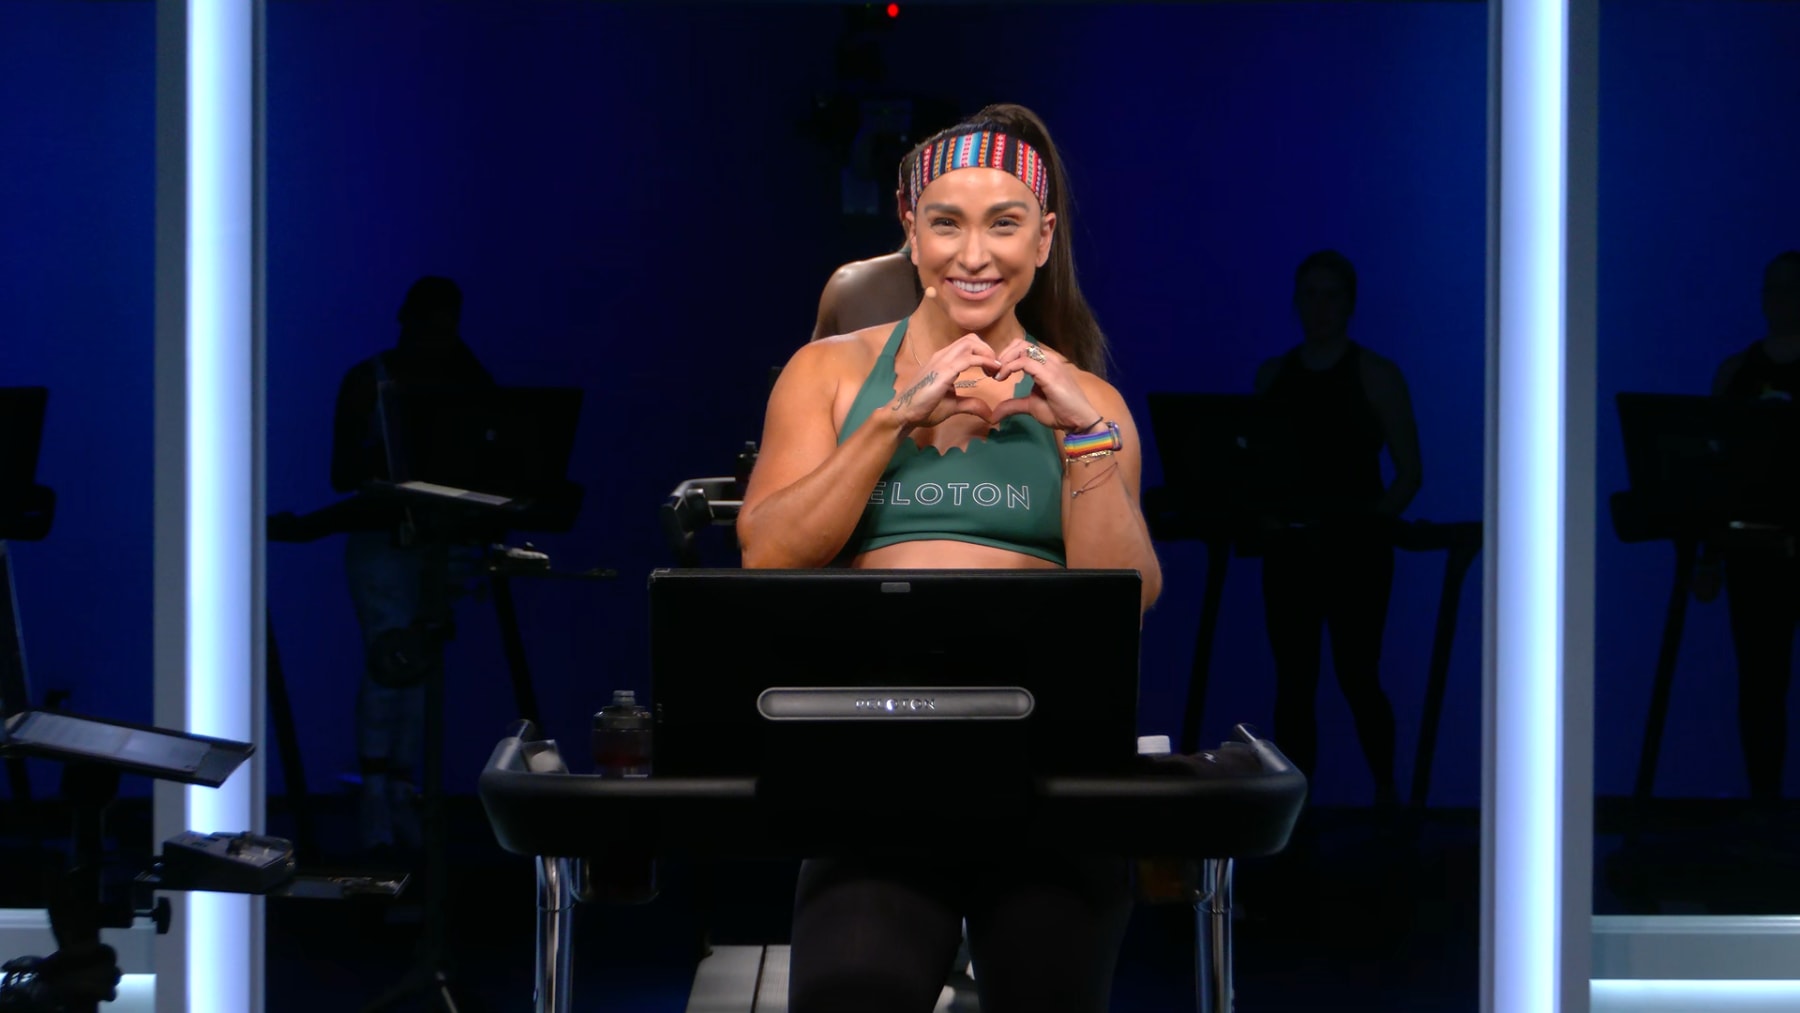 Peloton a fitness instructor tackles mental health during online